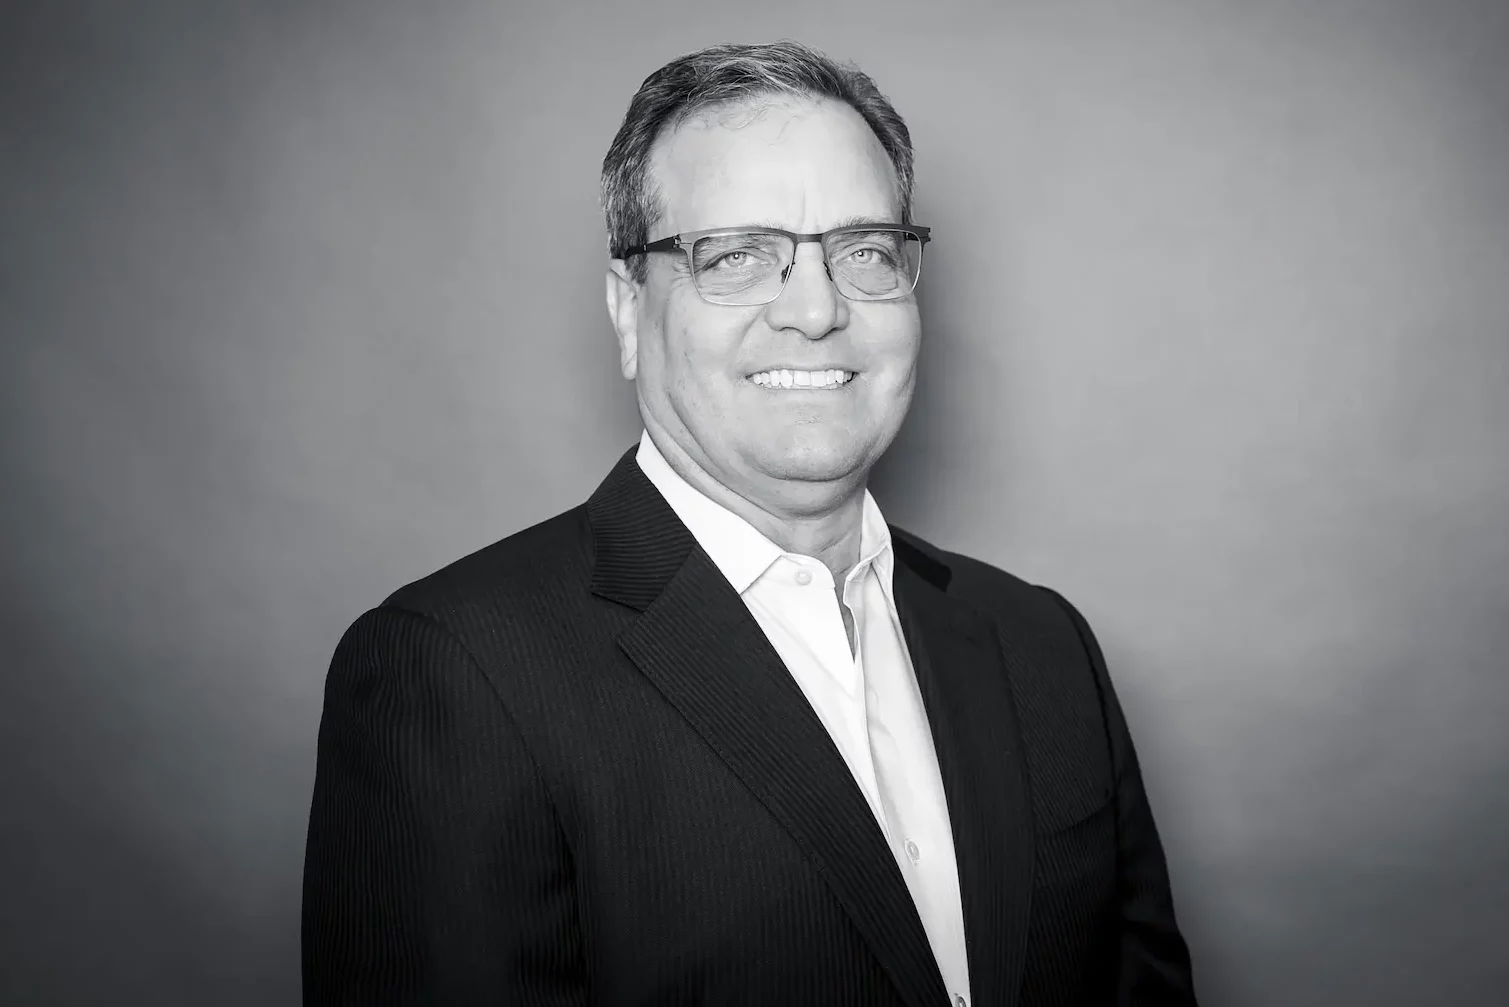 A professional man in a suit and glasses posing for a black and white photo.